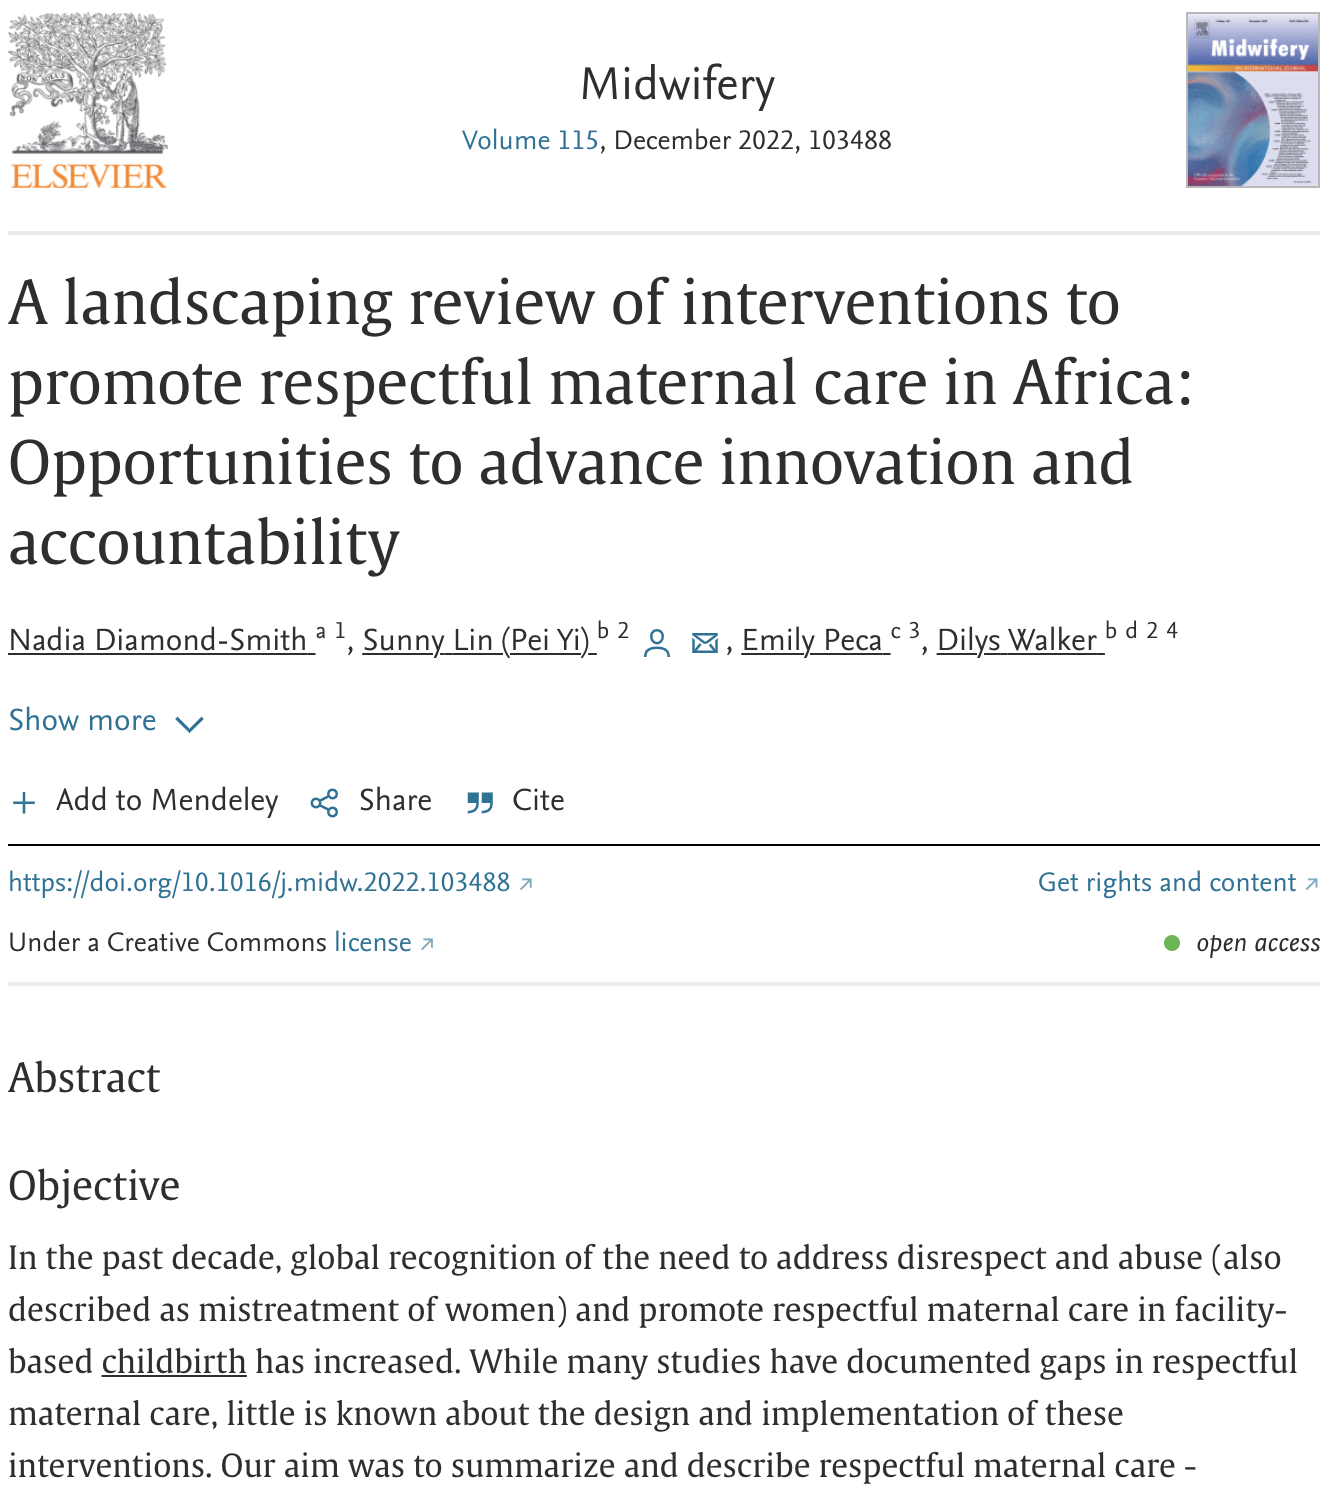 A landscaping review of interventions to promote respectful maternal care in Africa: Opportunities to advance innovation and accountability